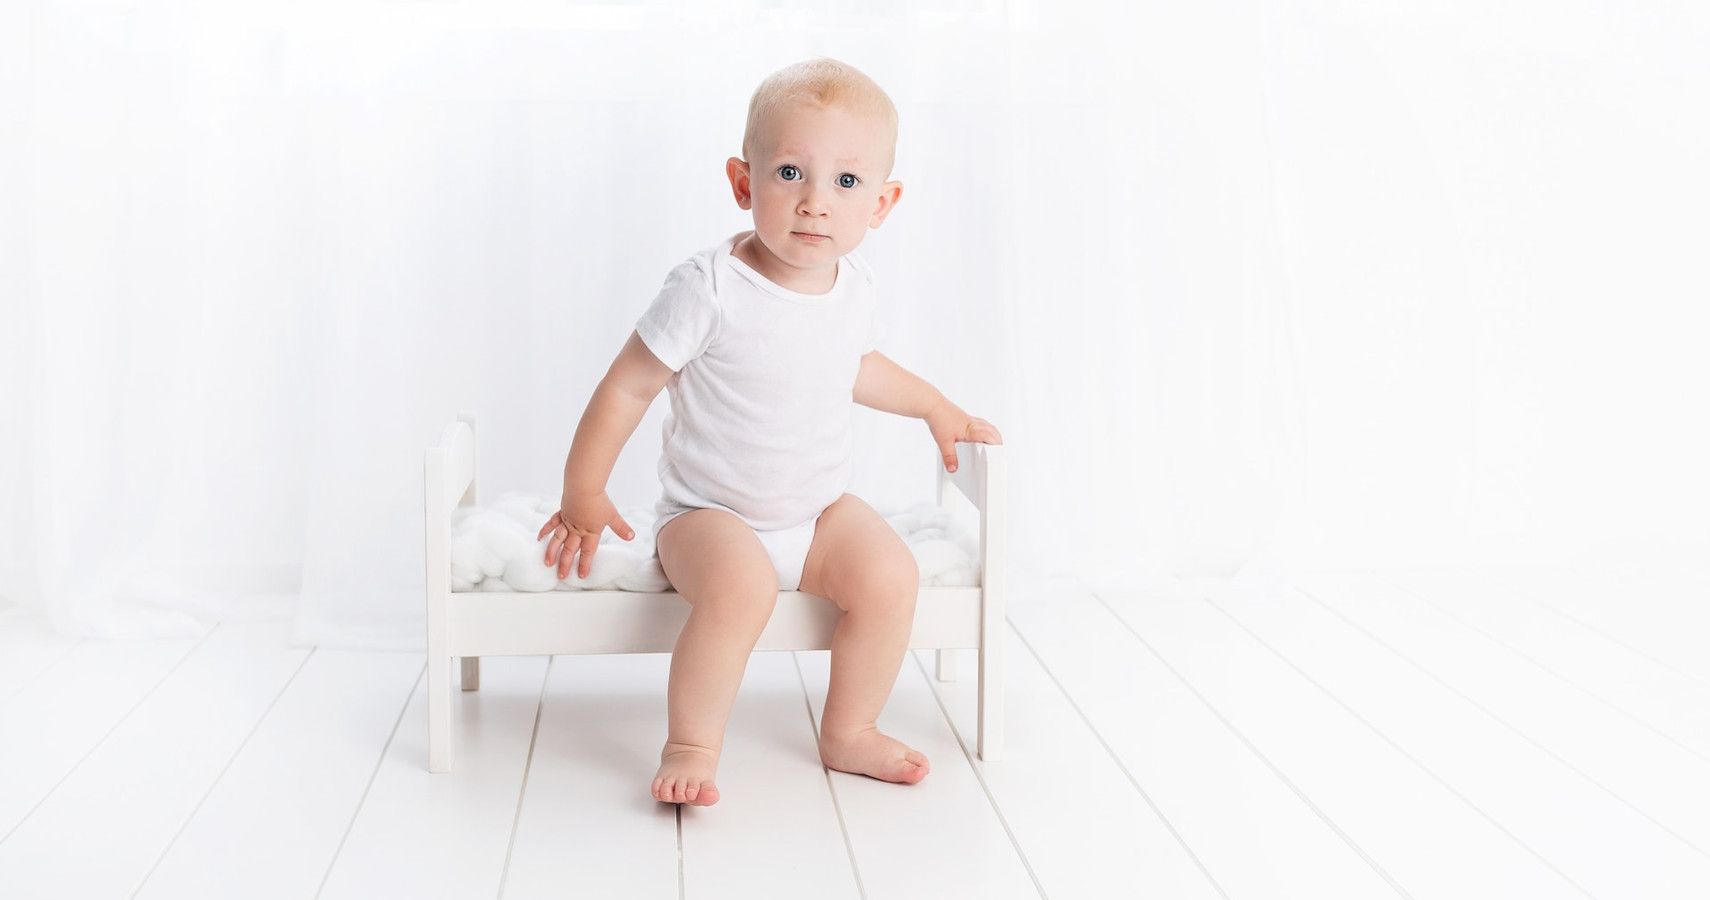 A baby in white sitting on a white bed on a white background.